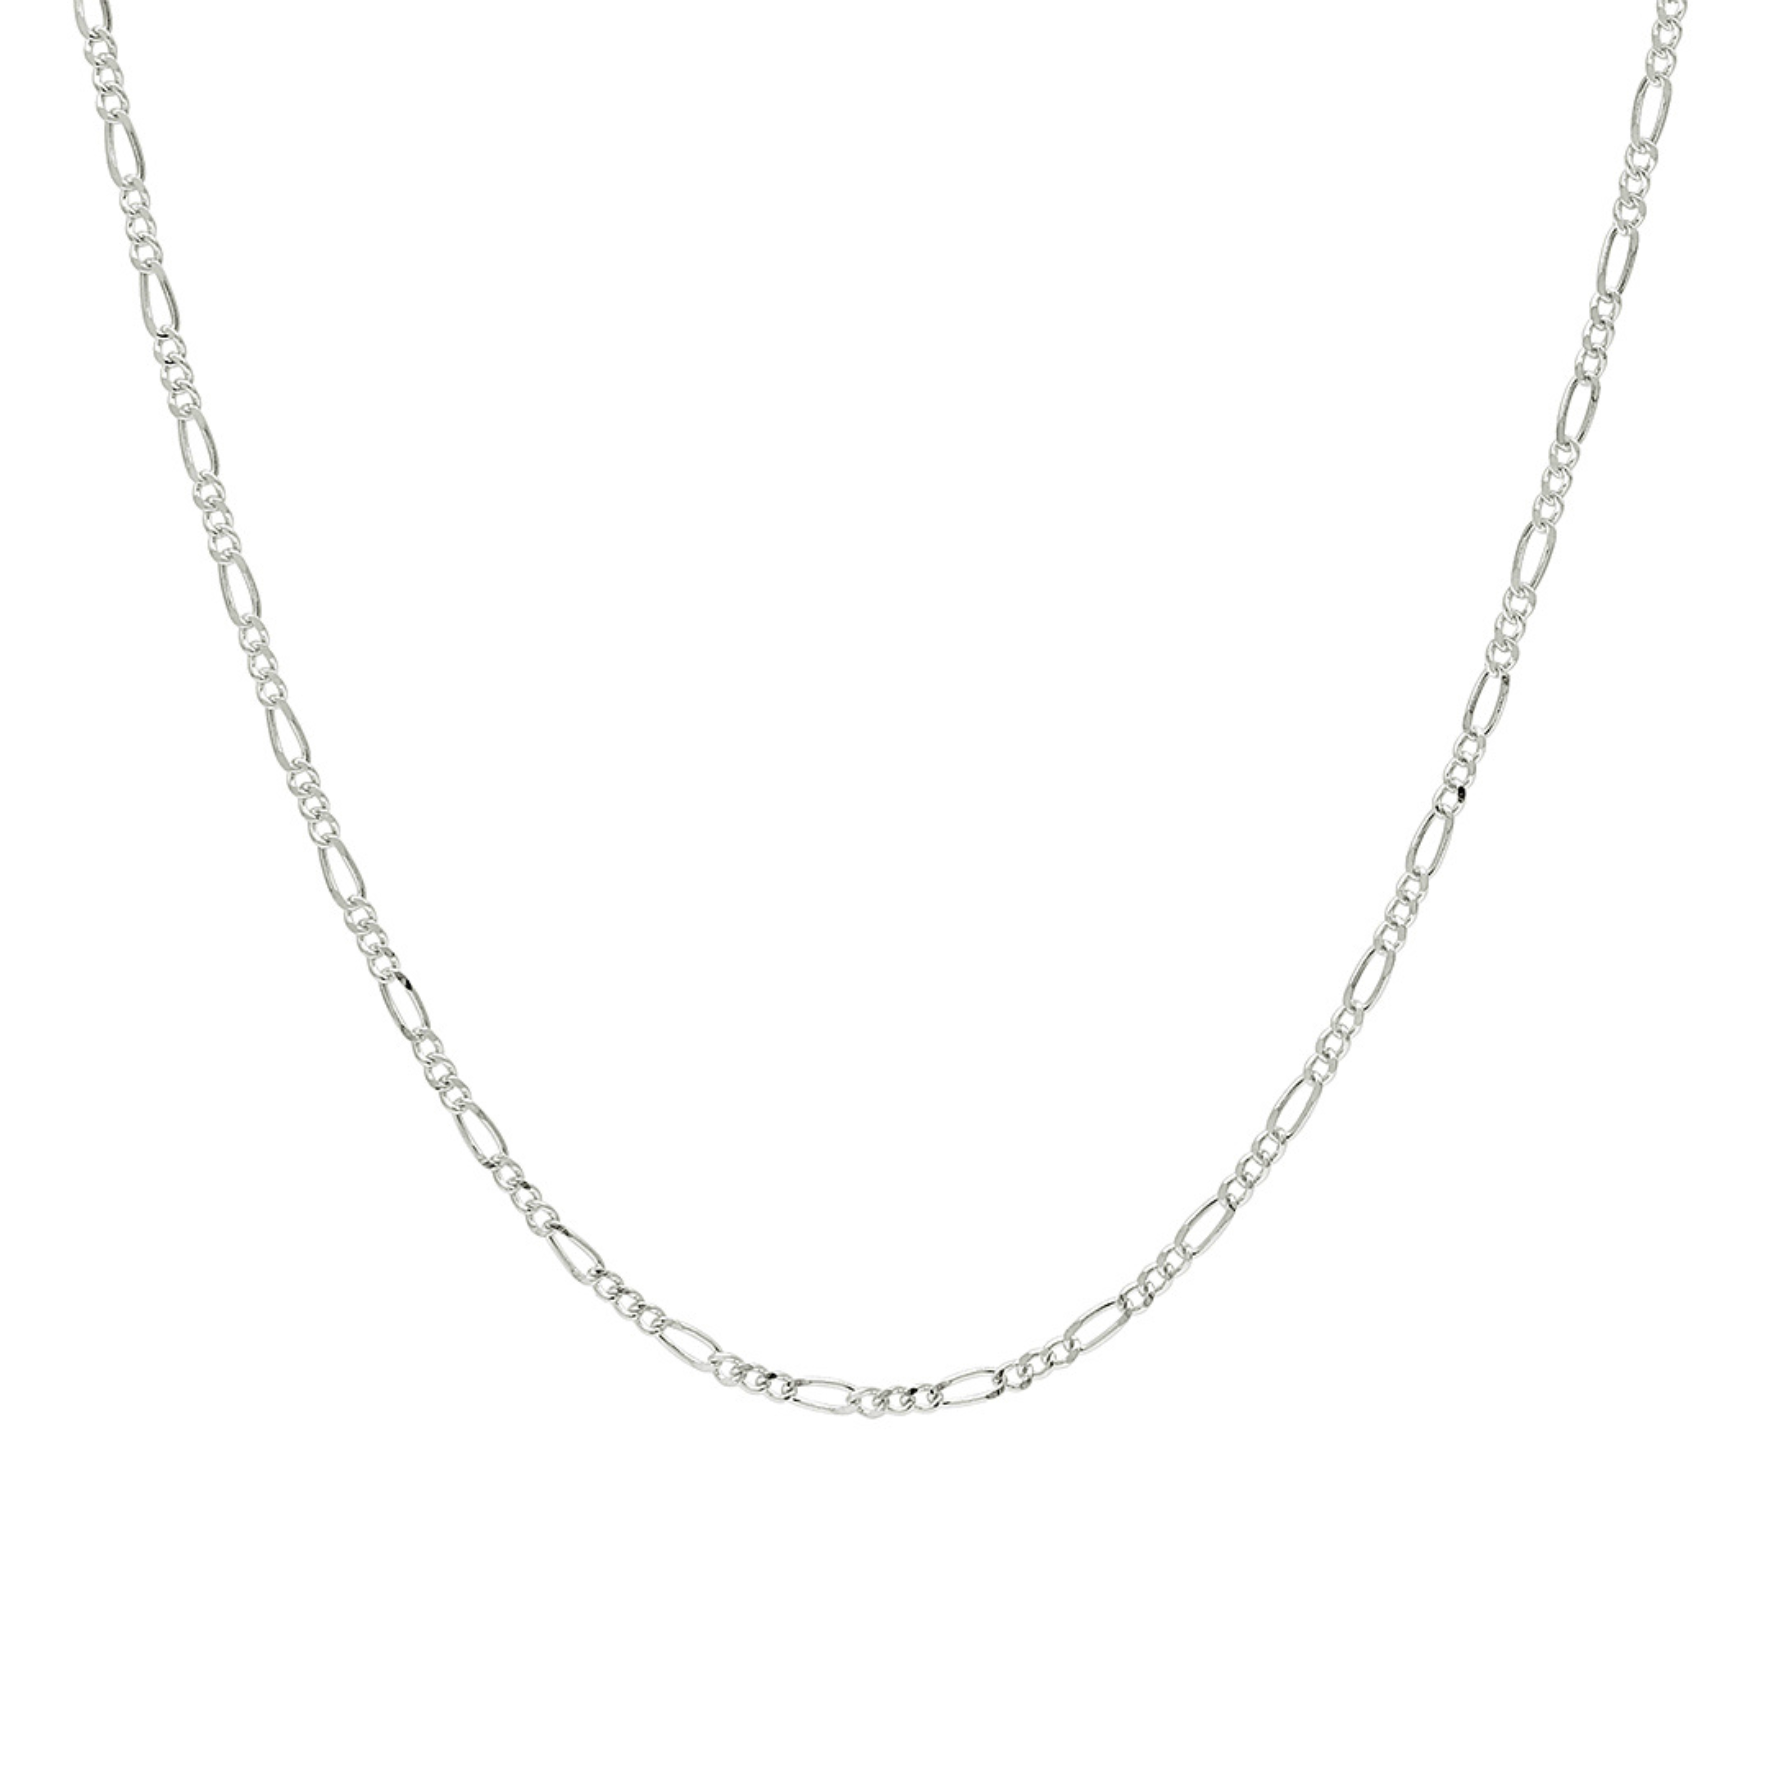 Frida Figaro Necklace from A-Hjort Jewellery in Silver Sterling 925